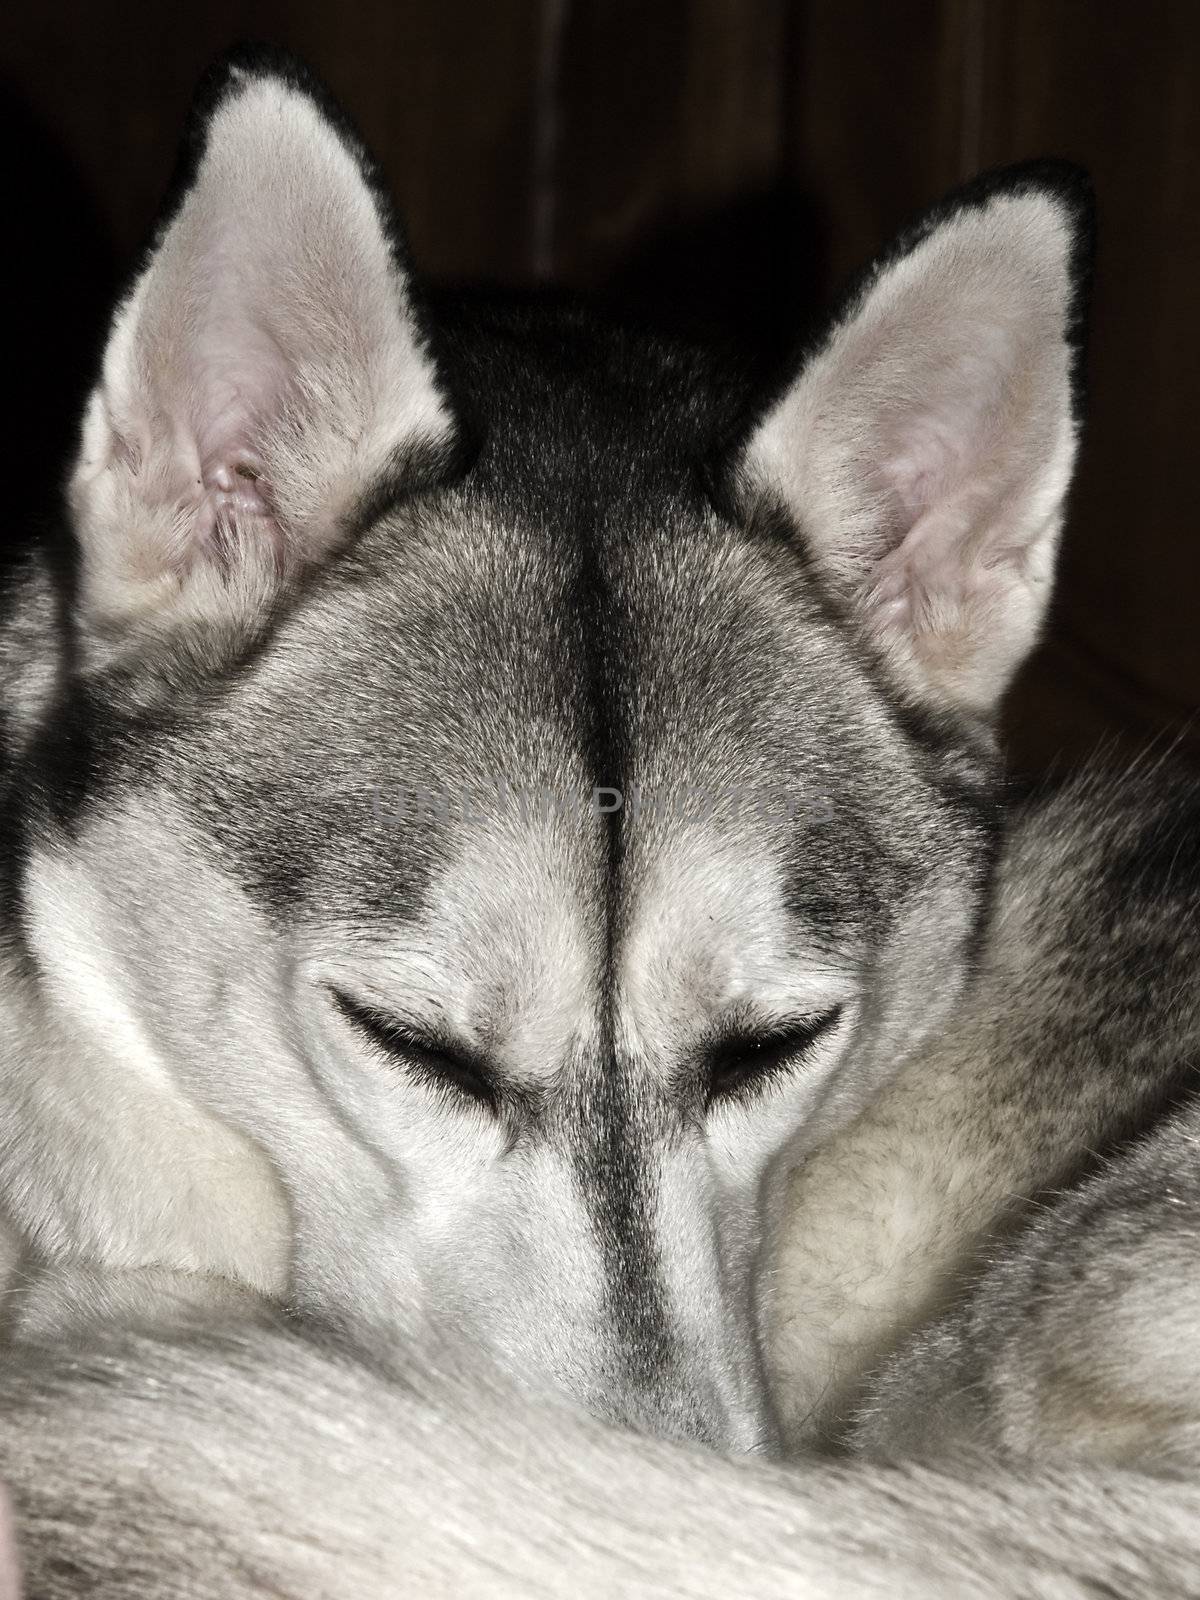 Husky dog curled up and ready to doze off